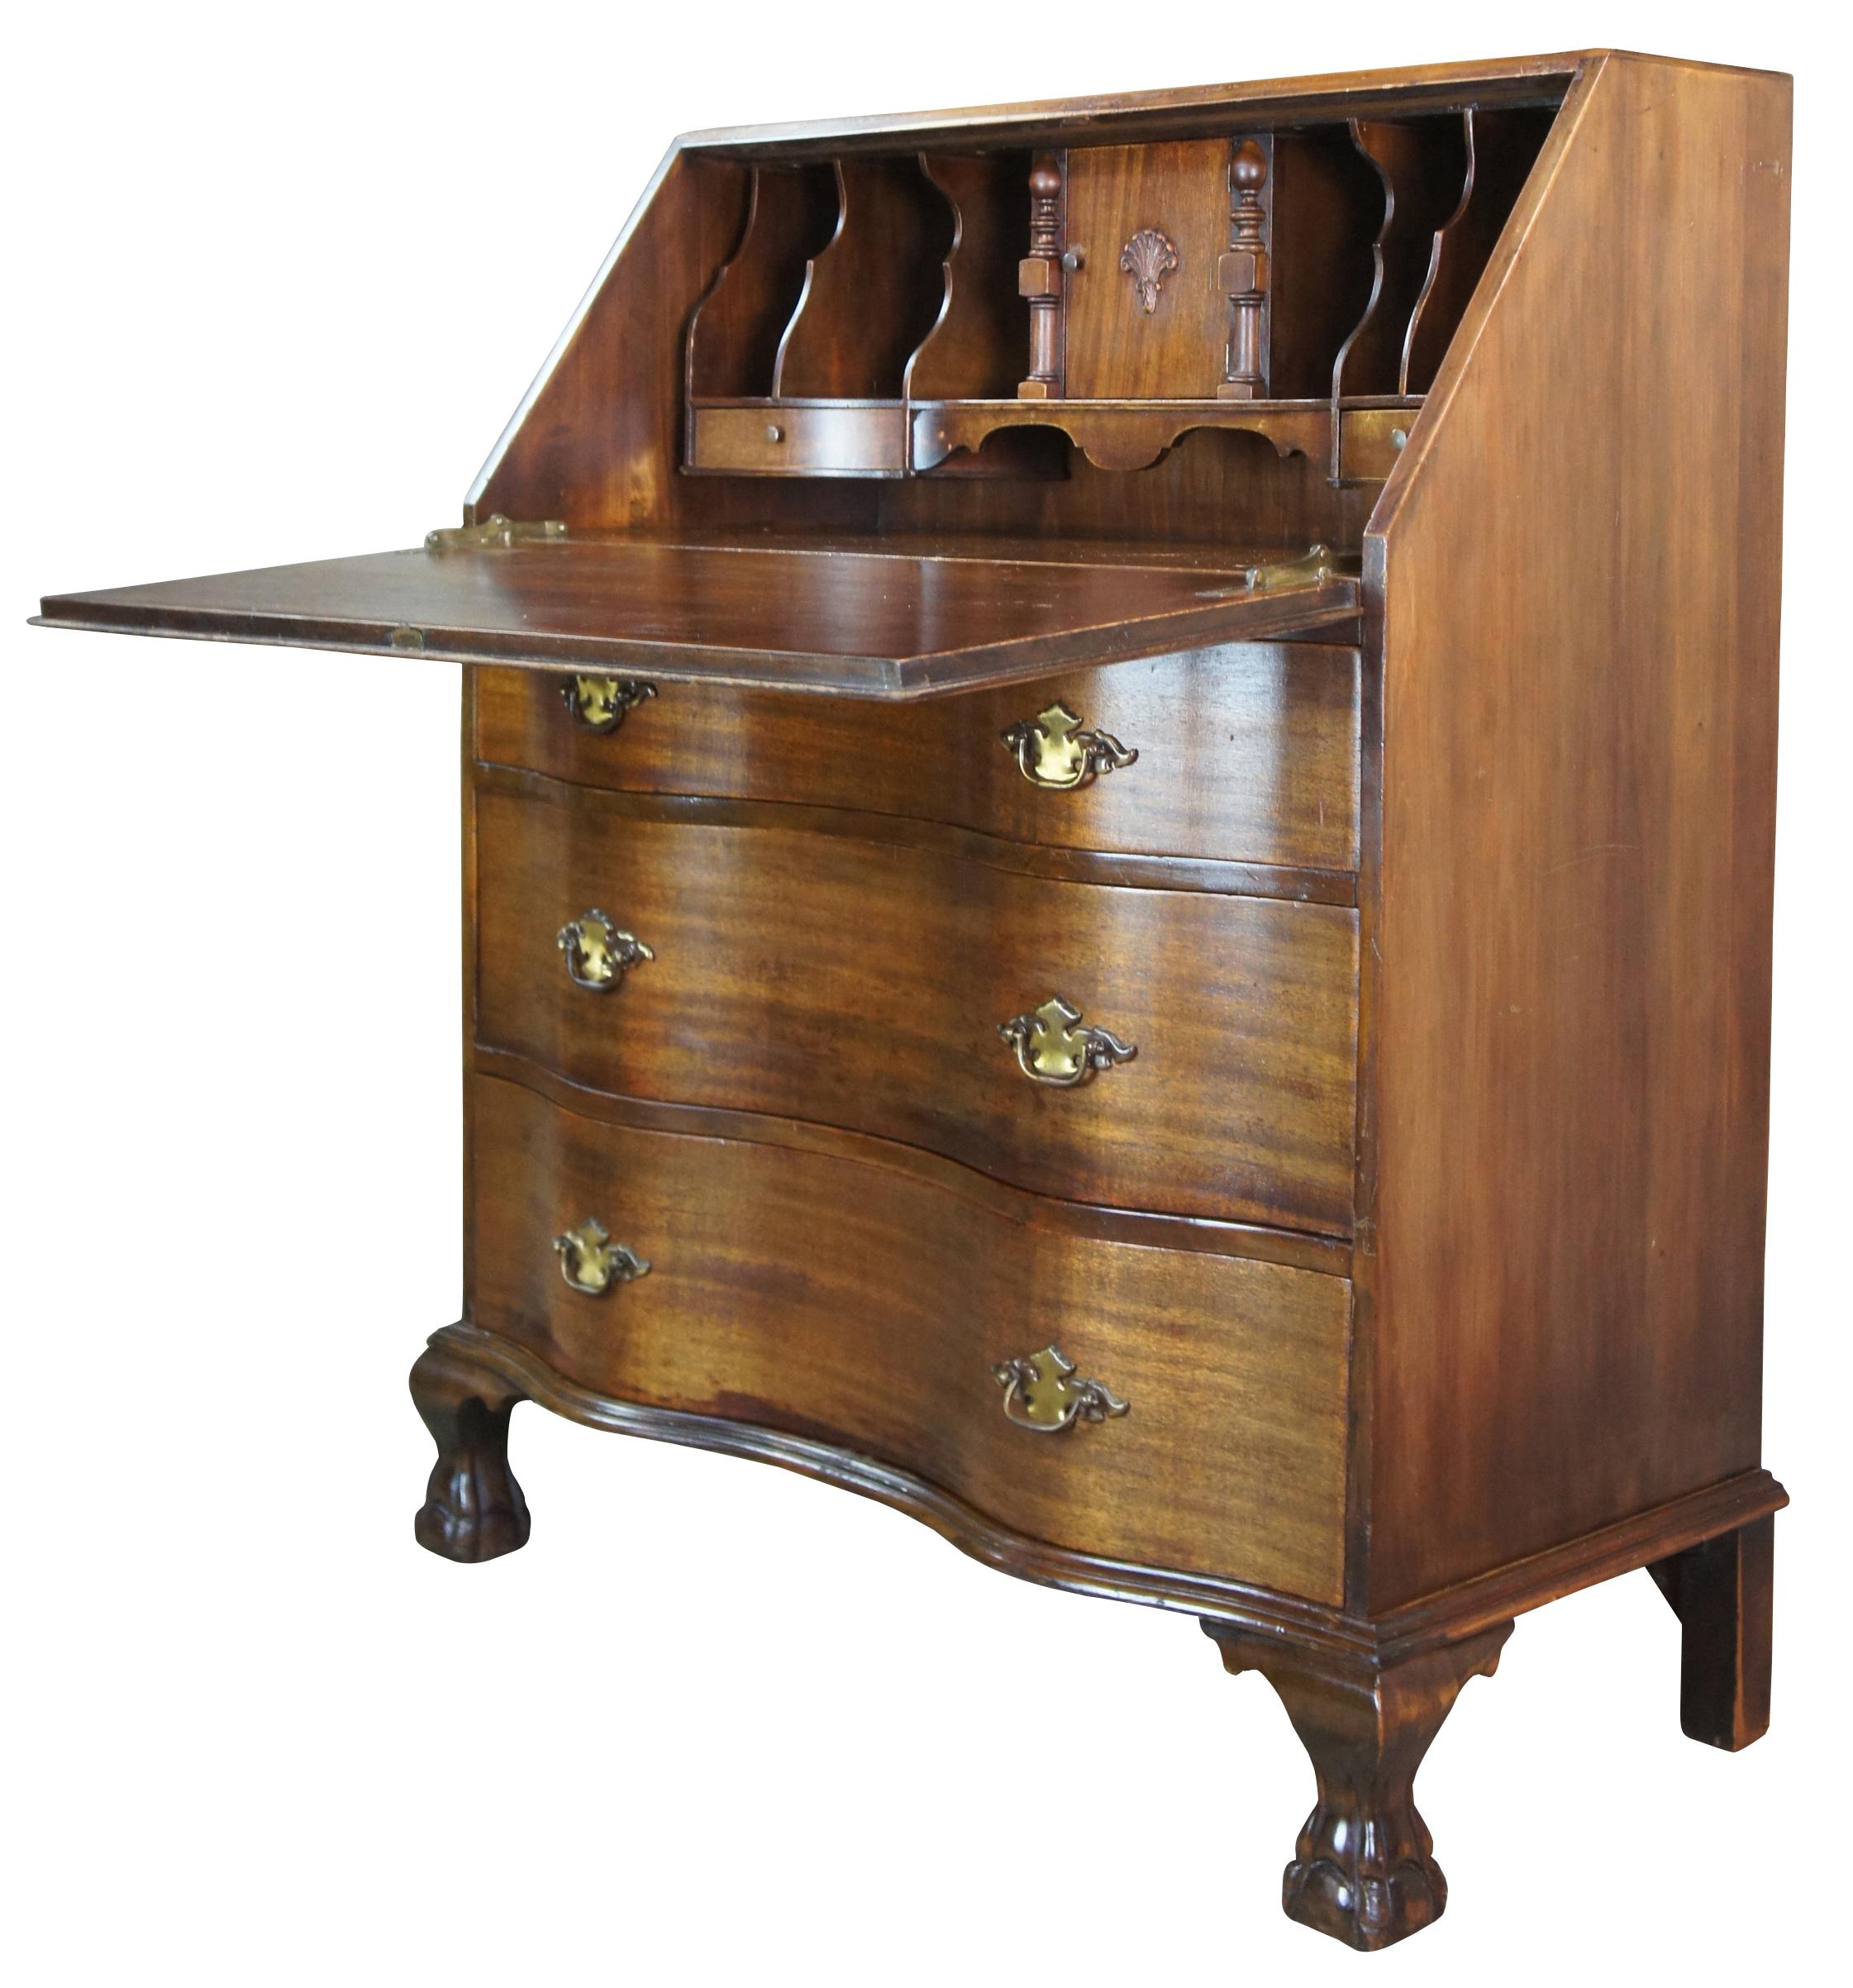 Antique Chippendale secretary, bureau or writing desk. Made from mahogany featuring a flip top that opens to multiple drawers and file storage. The dresser is constructed with an oxbow front with three drawers and federal style hardware over ball